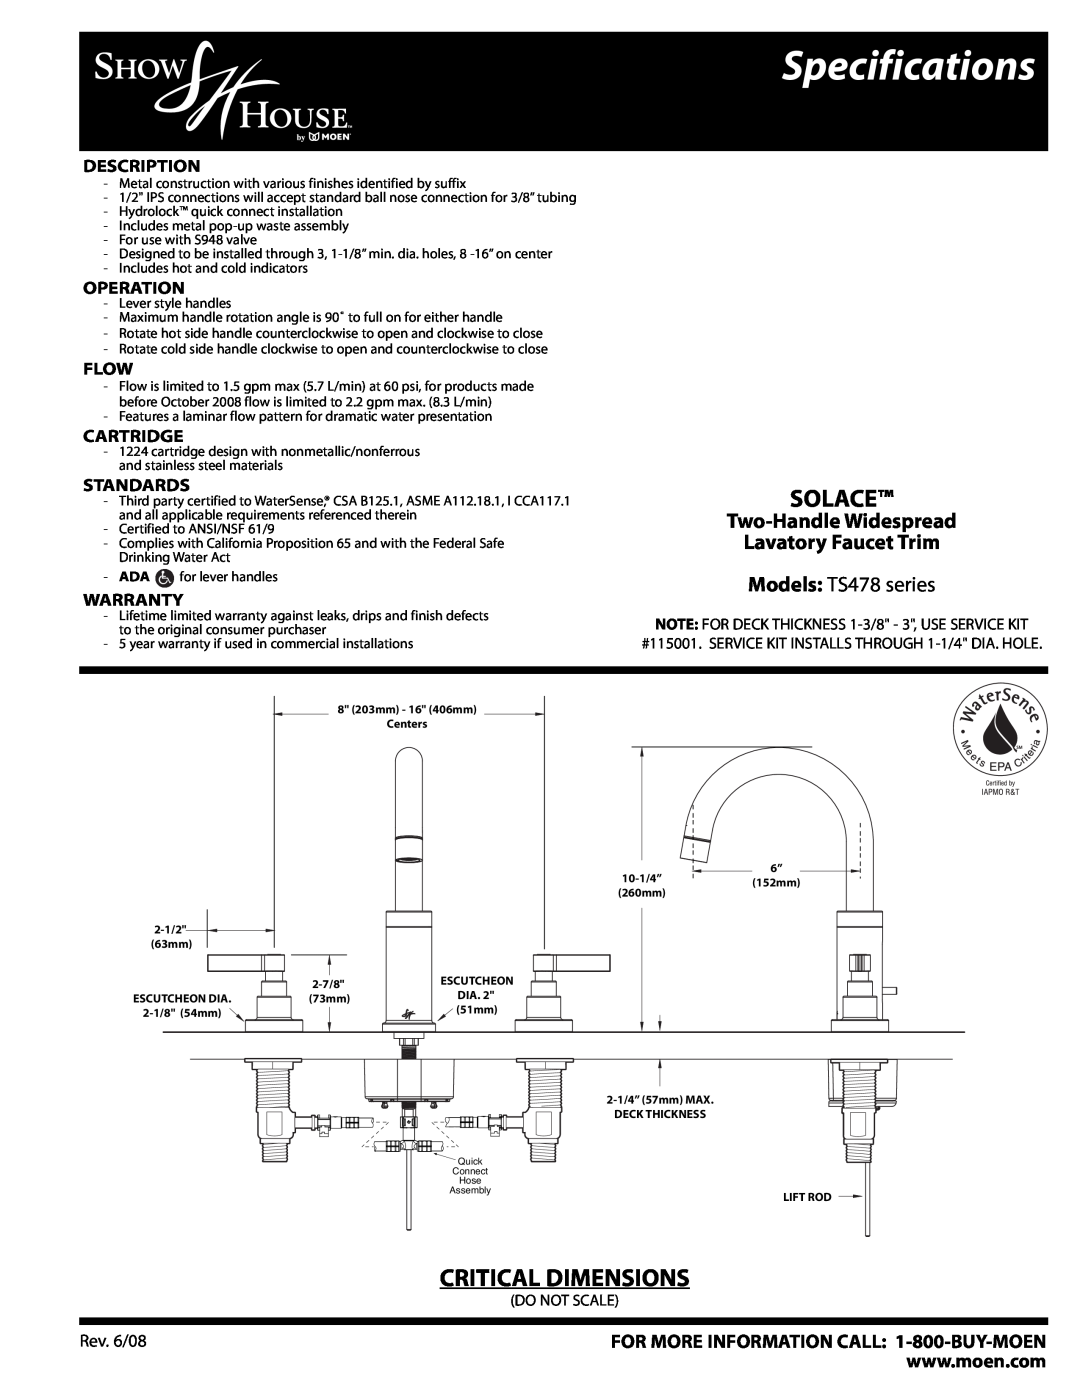 Moen TS478 Series specifications Specifications, Solace, Critical Dimensions, Two-Handle Widespread Lavatory Faucet Trim 